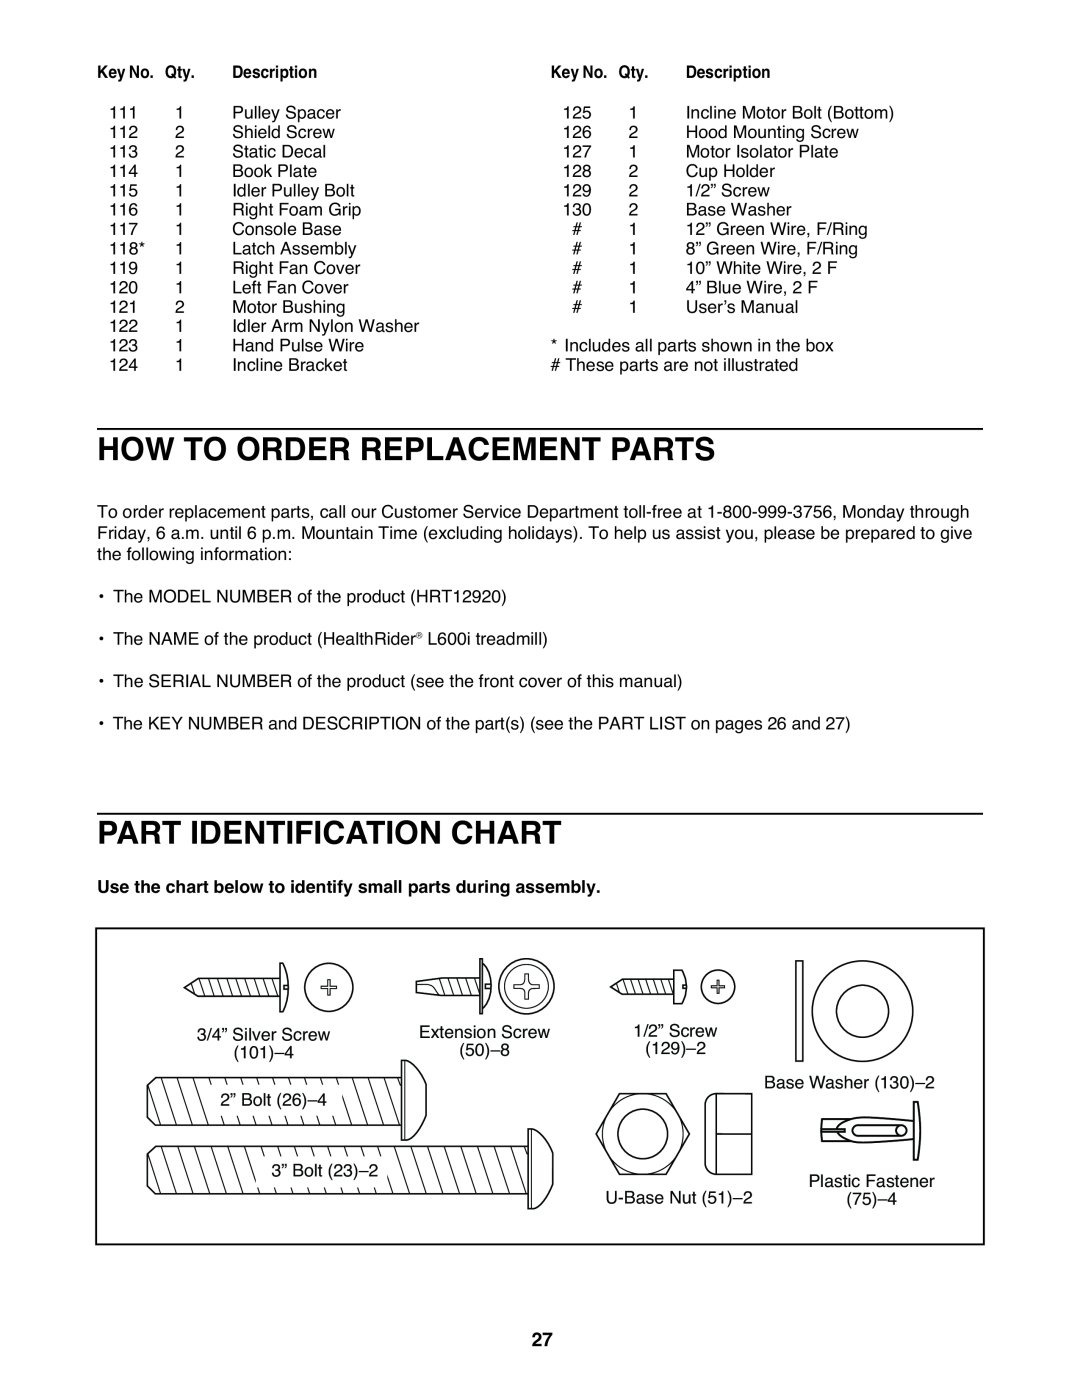 Healthrider HRT12920 manual How To Order Replacement Parts, Part Identification Chart, Description 